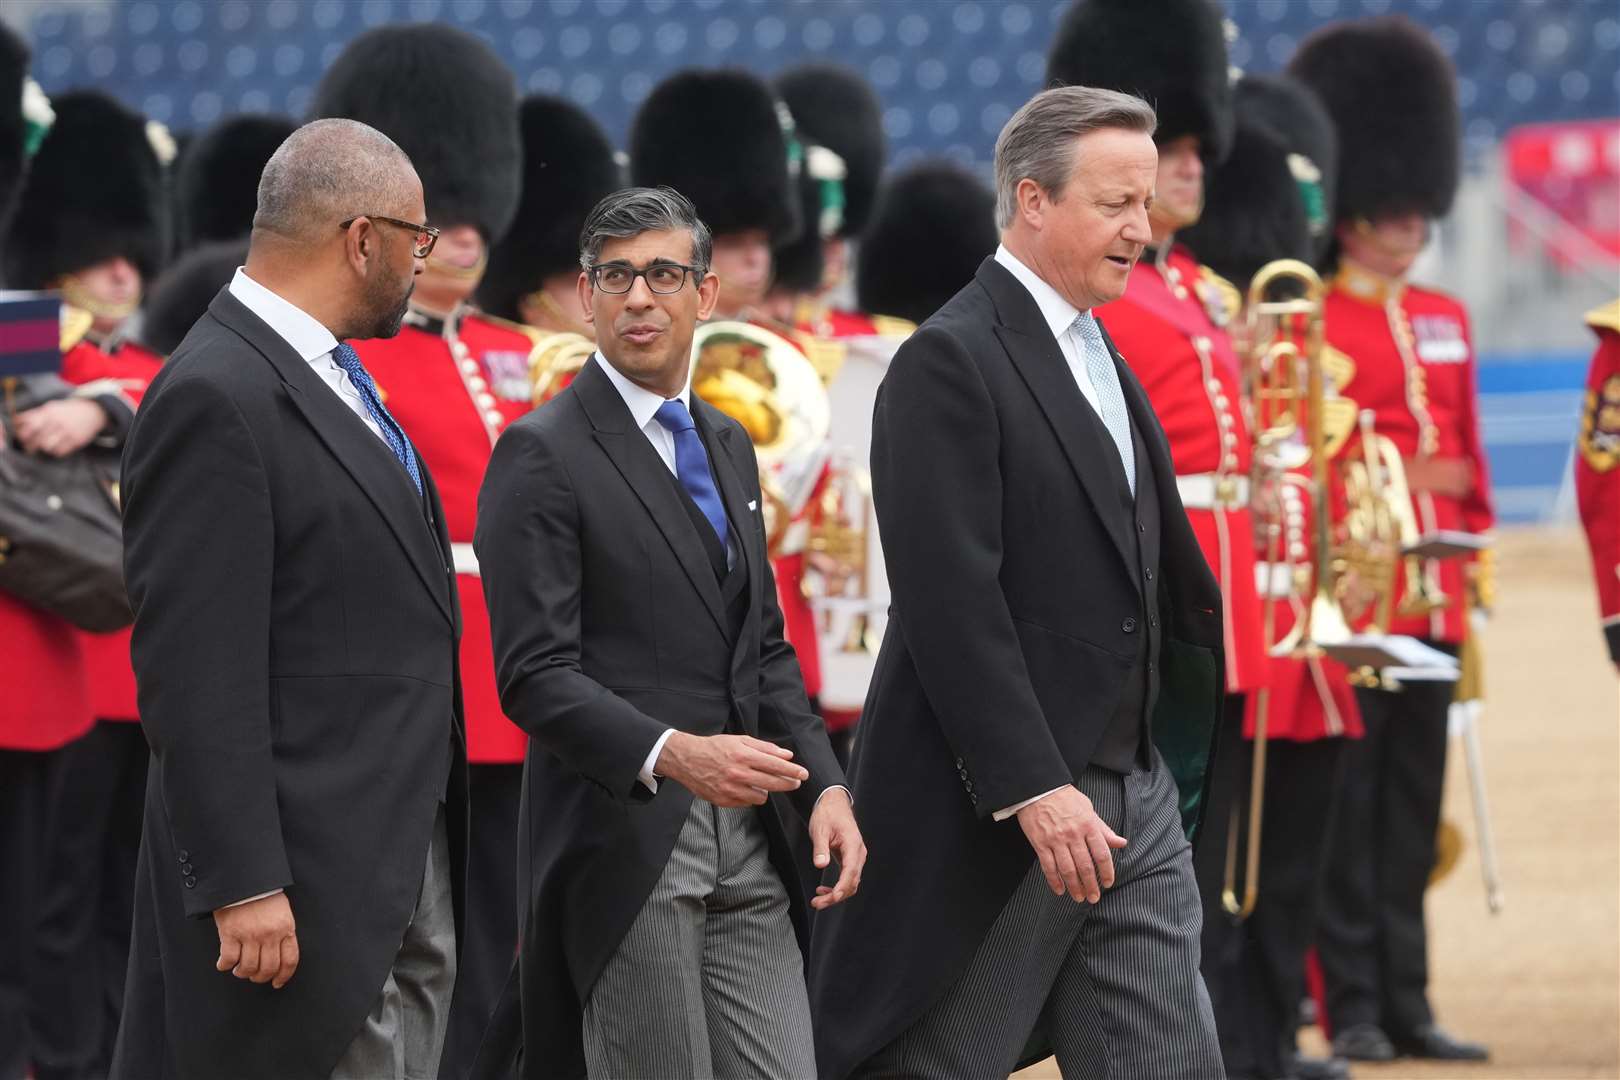 Home Secretary James Cleverly, Prime Minister Rishi Sunak and Foreign Secretary Lord David Cameron attended the ceremonial welcome at Horse Guards Parade (Jeff Moore/PA)